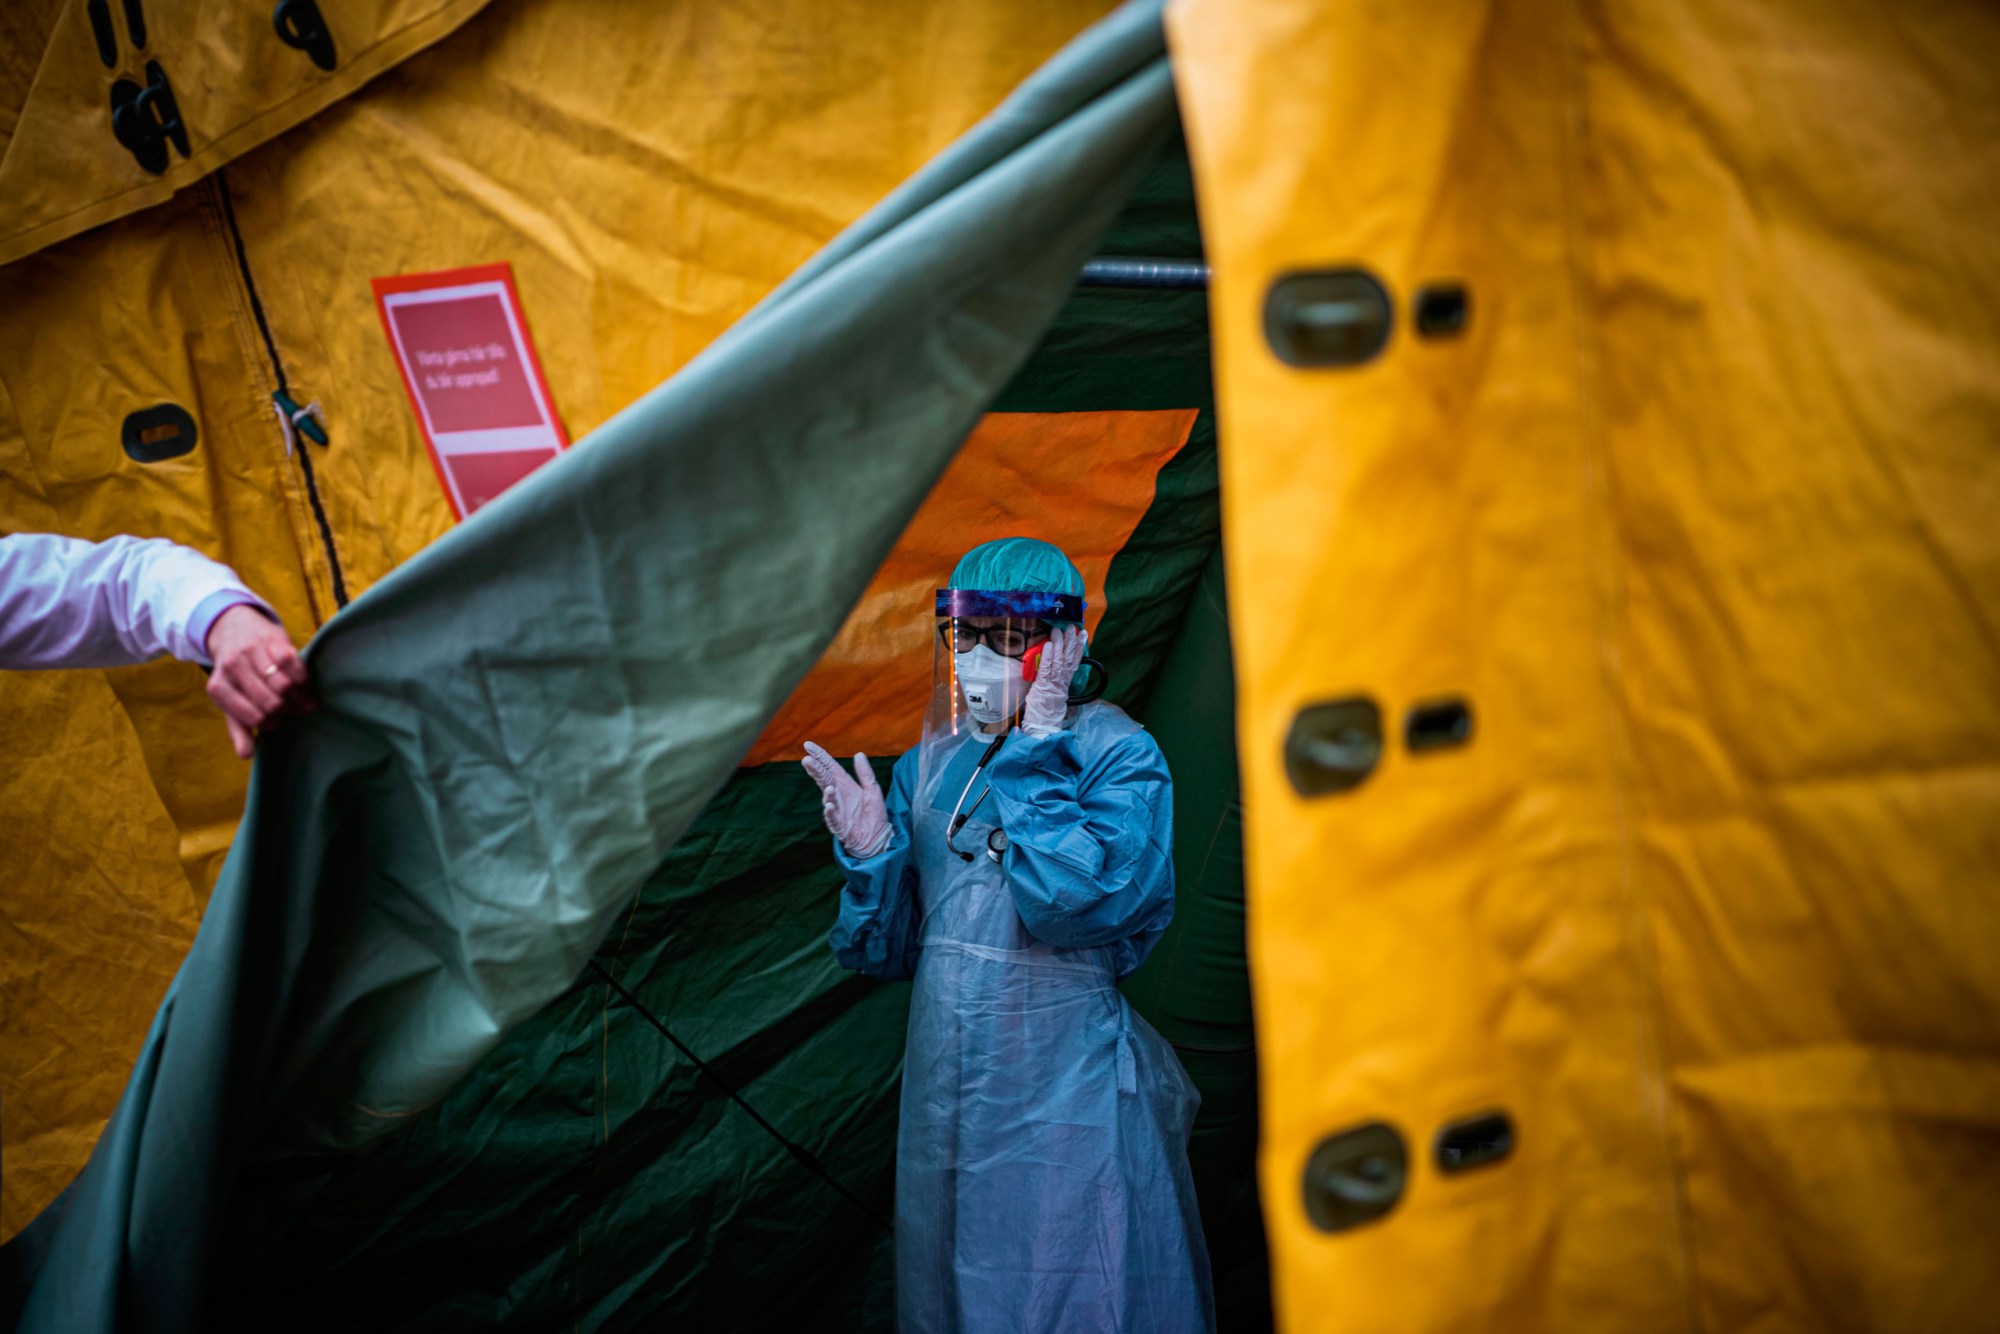 A medical staffer at Sophiahemmet hospital in Stockholm talks on a cell phone while exiting a tent for testing and receiving potential COVID-19 patients, April 2020. (Getty/AFP/Jonathan Nackstrand)